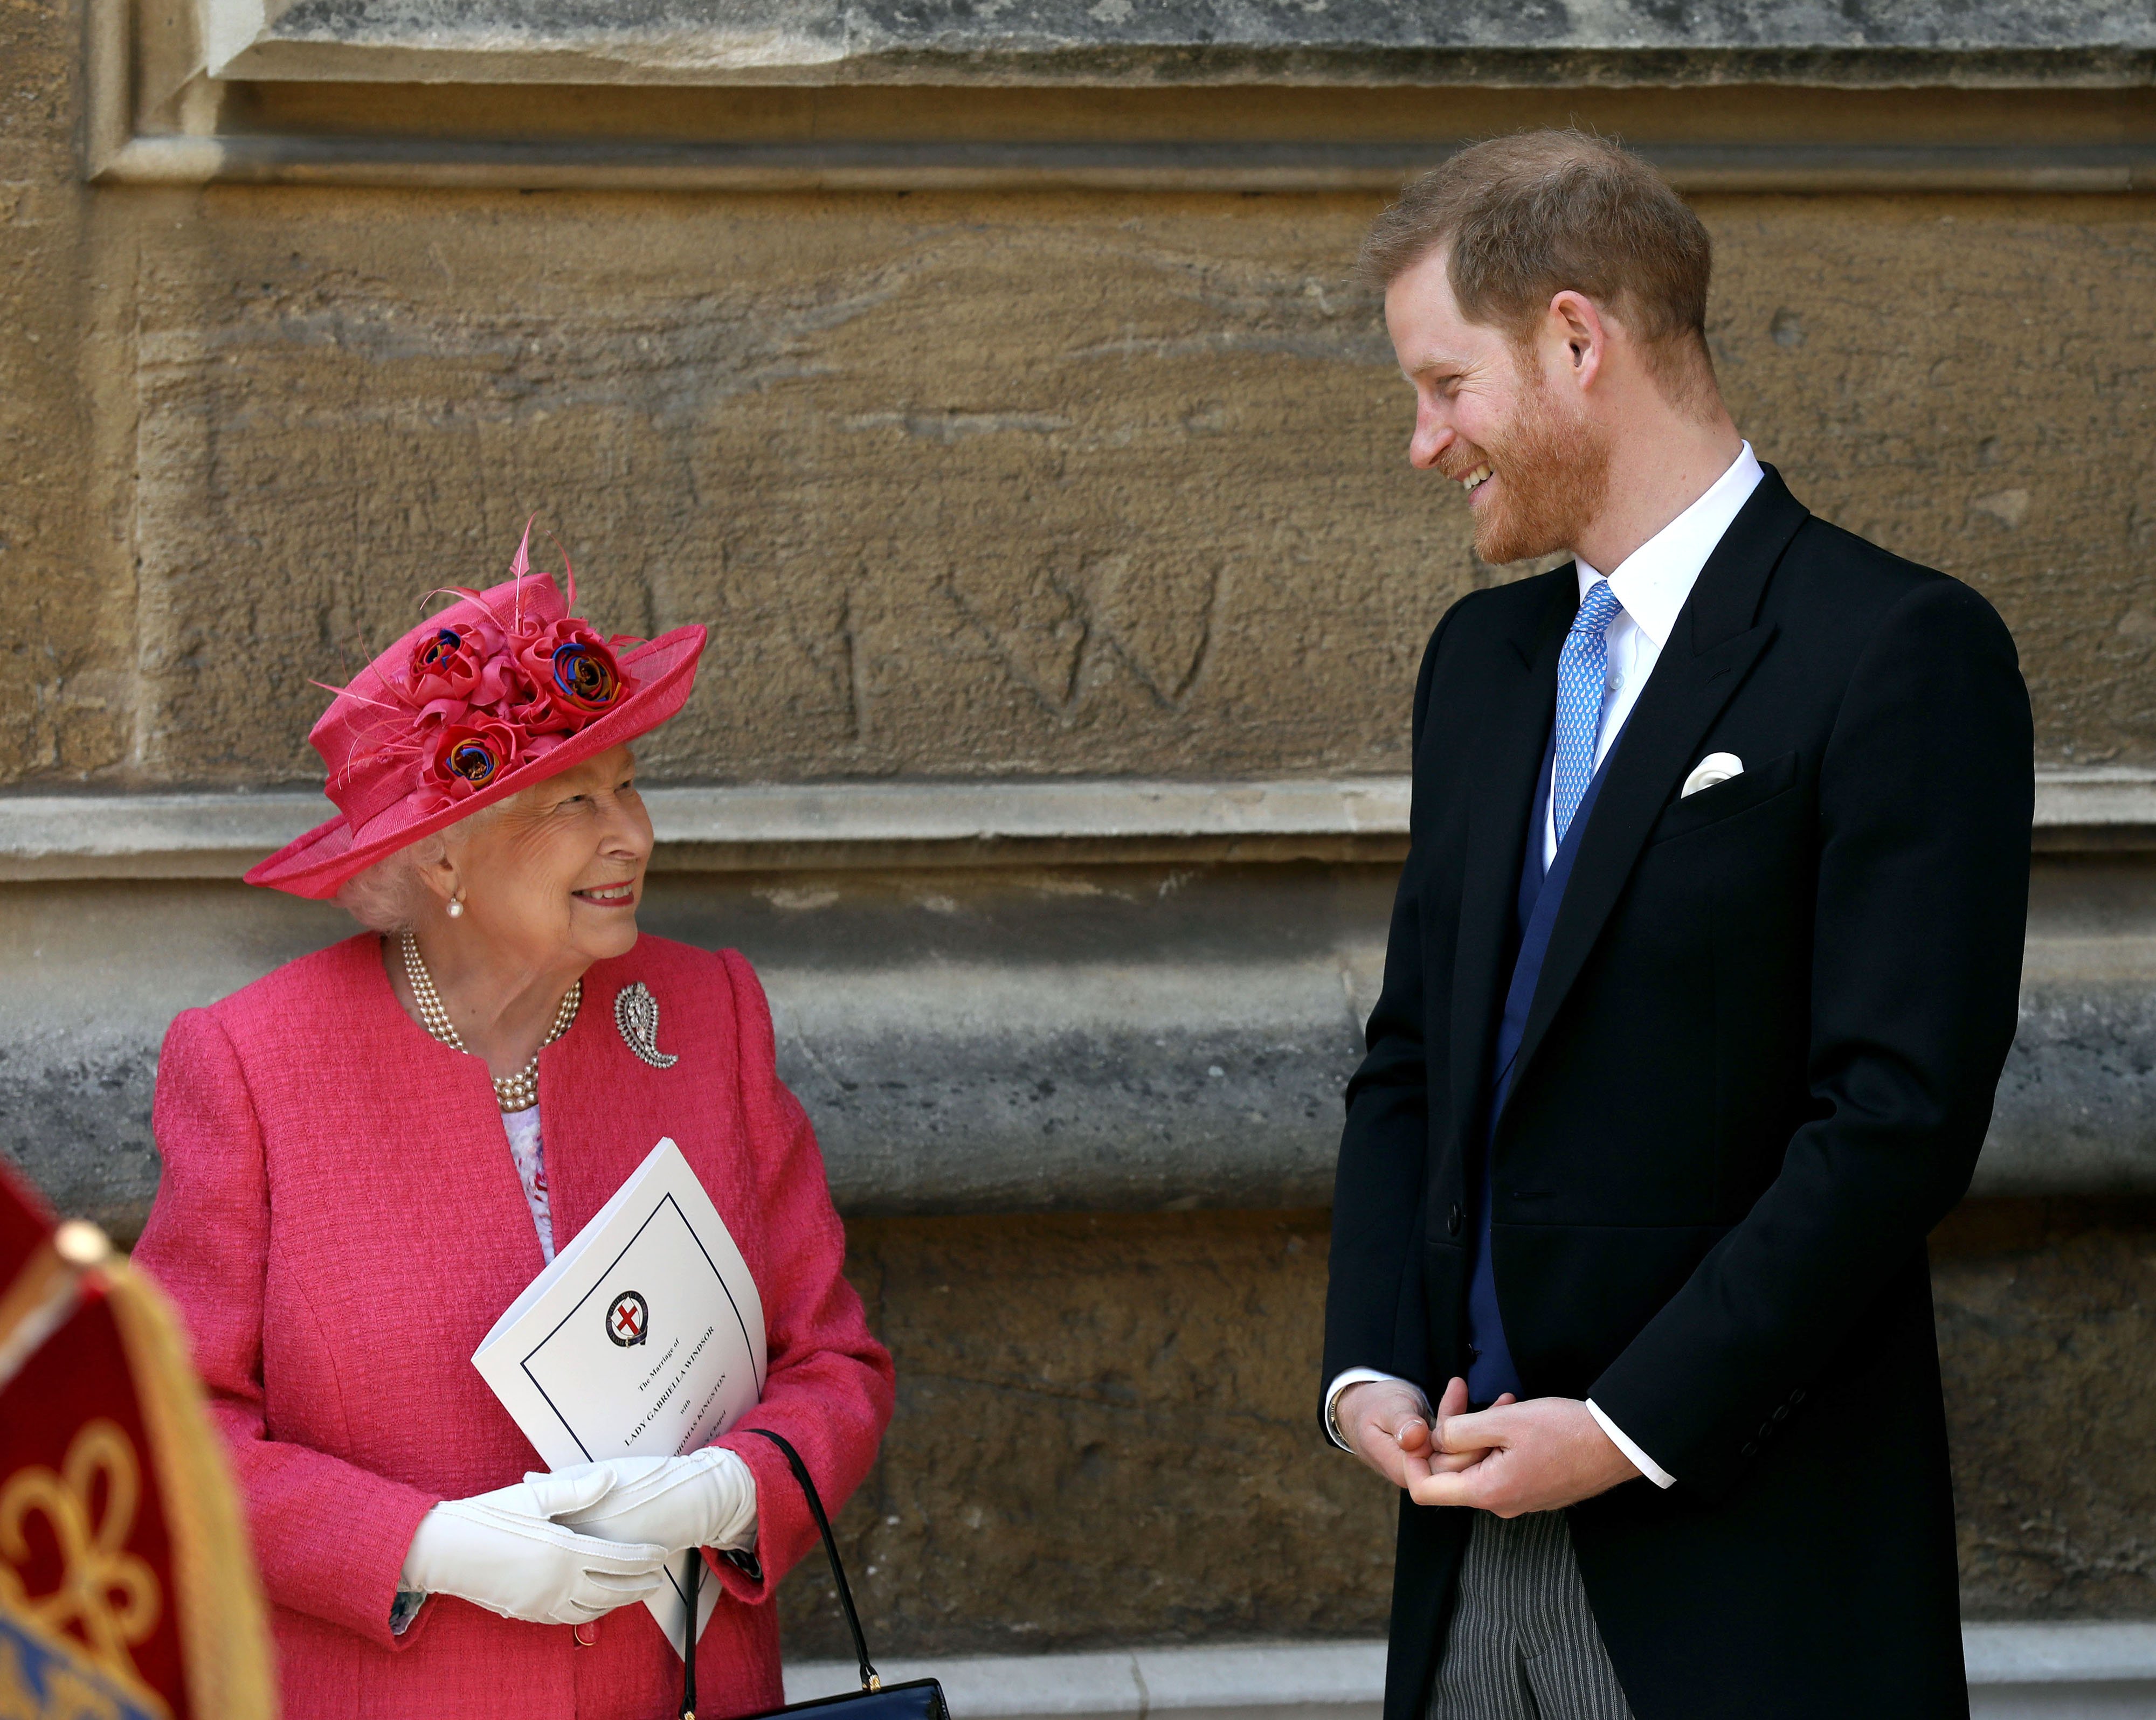 Queen Elizabeth II speaks with Prince Harry, Duke of Sussex, as they leave after the wedding of Lady Gabriella Windsor to Thomas Kingston at St George's Chapel, Windsor Castle, on May 18, 2019, in Windsor, England. | Source: Getty Images